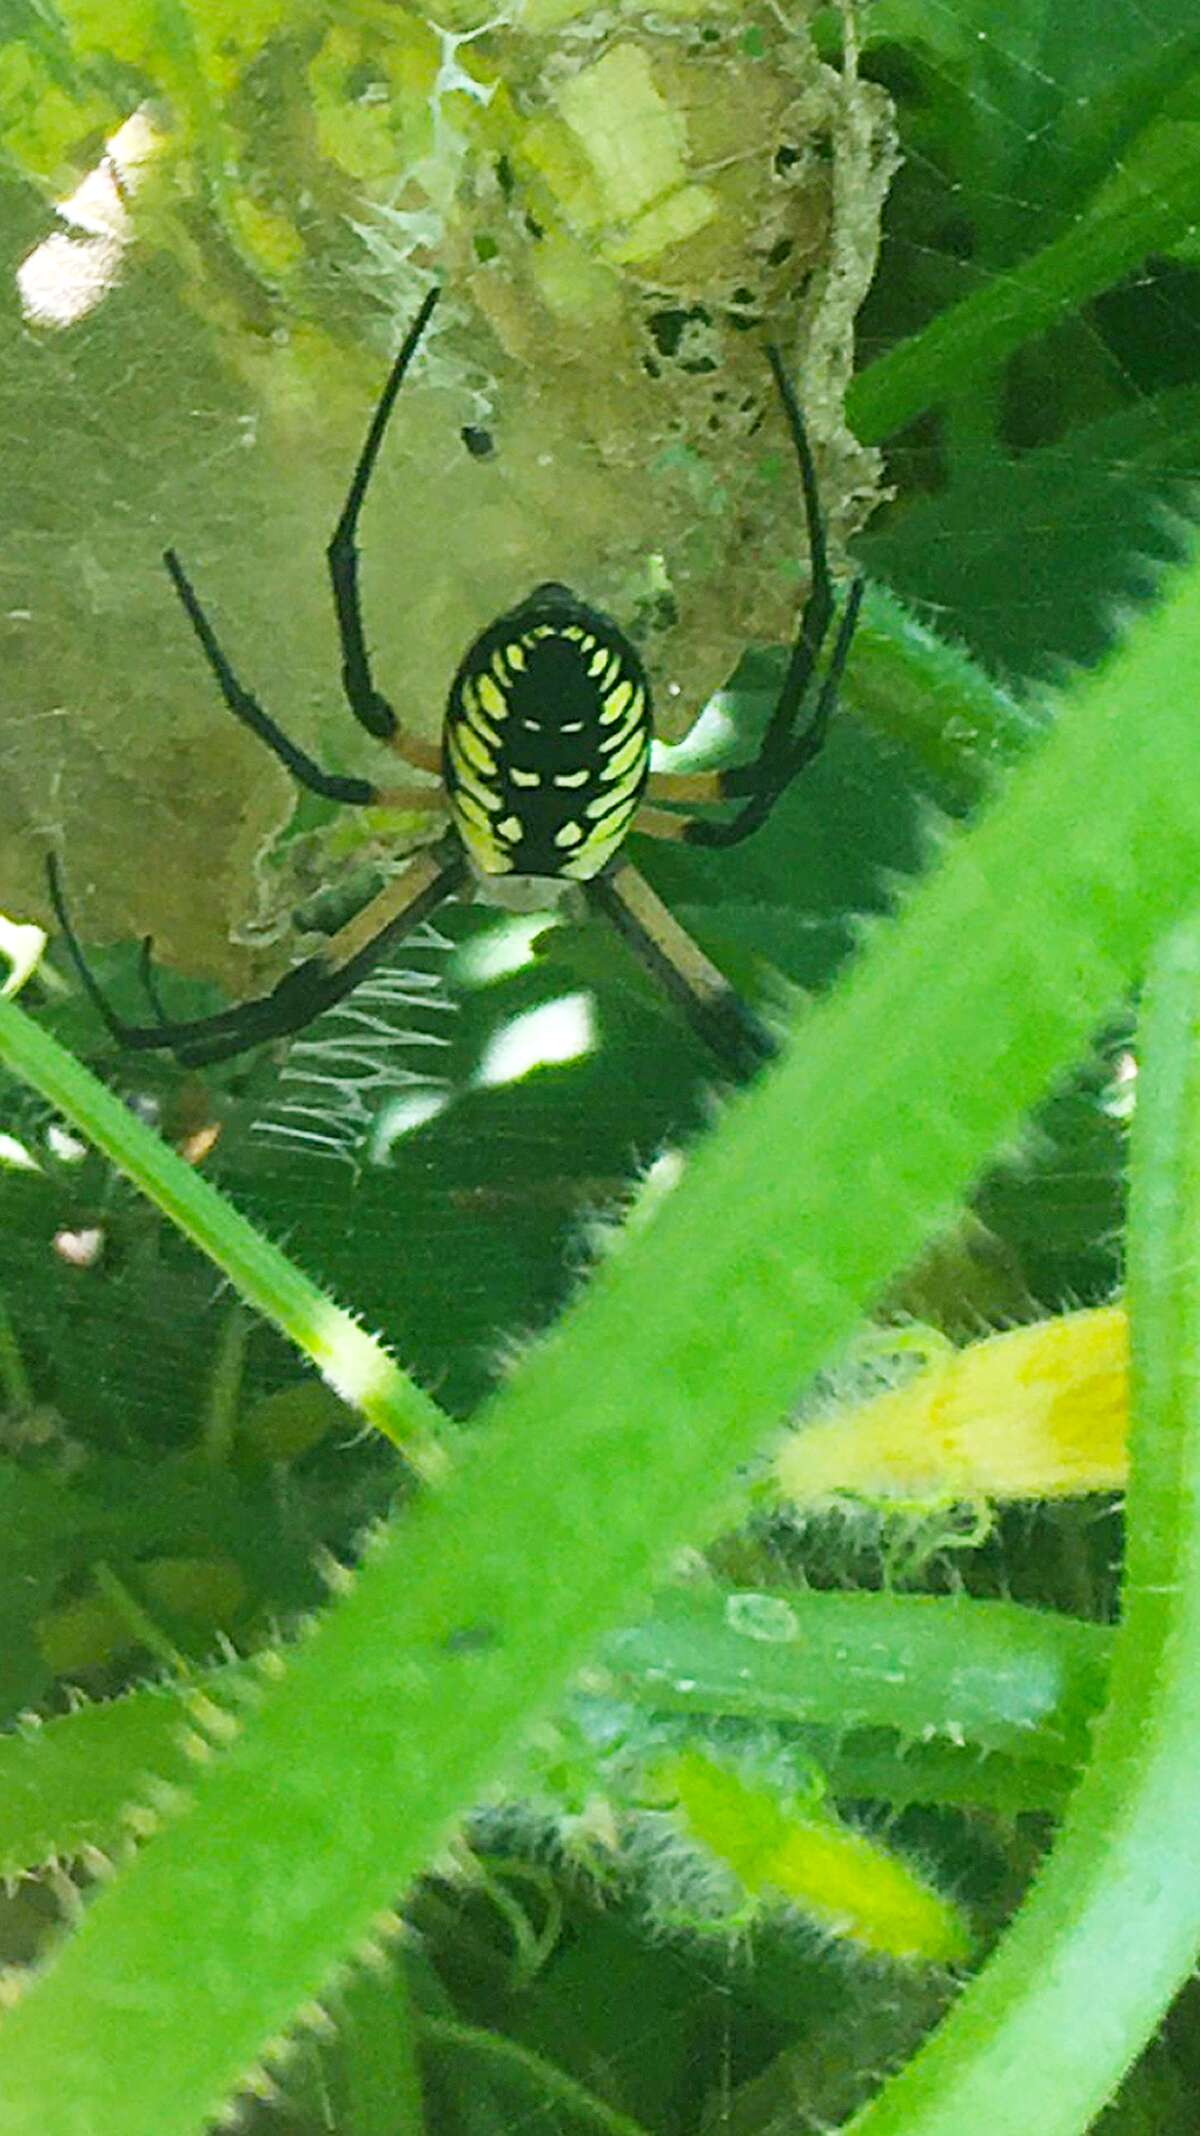 A garden spider concentrates on completing a web in an Alexander garden.